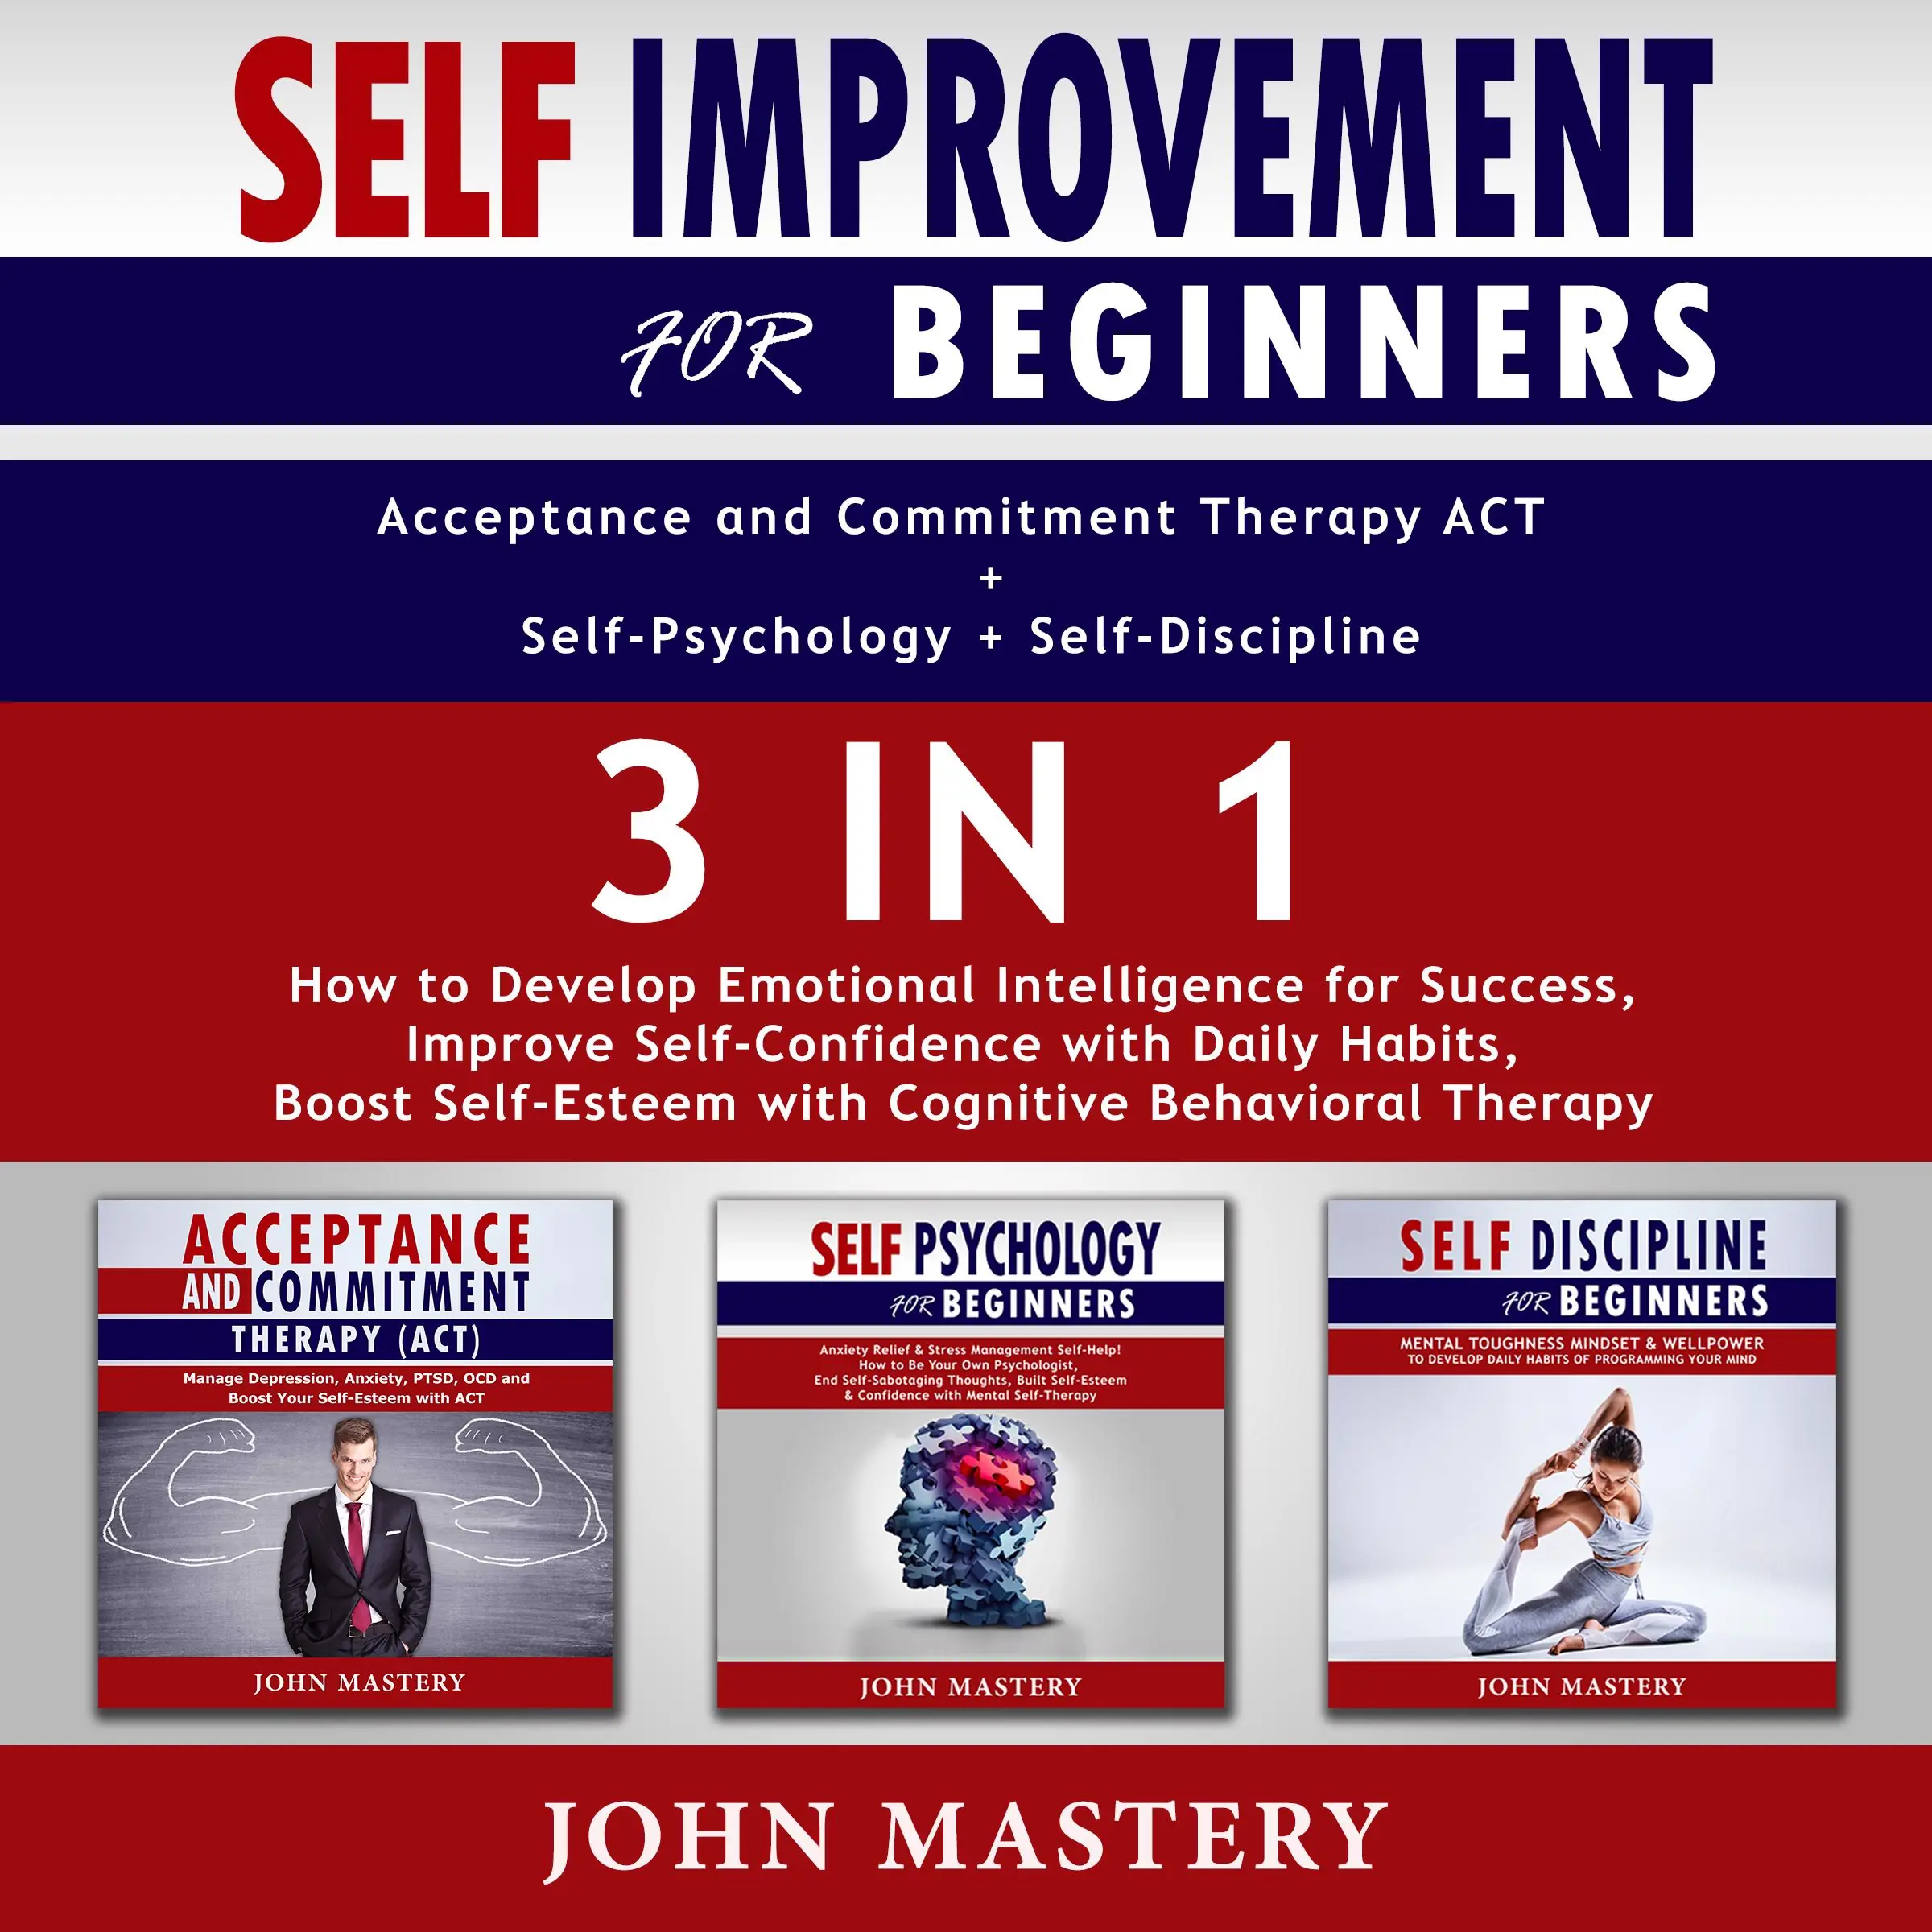 Self-Improvement for Beginners (Acceptance and Commitment Therapy ACT+Self-Psychology+Self-Discipline)-3in1 Audiobook by John Mastery